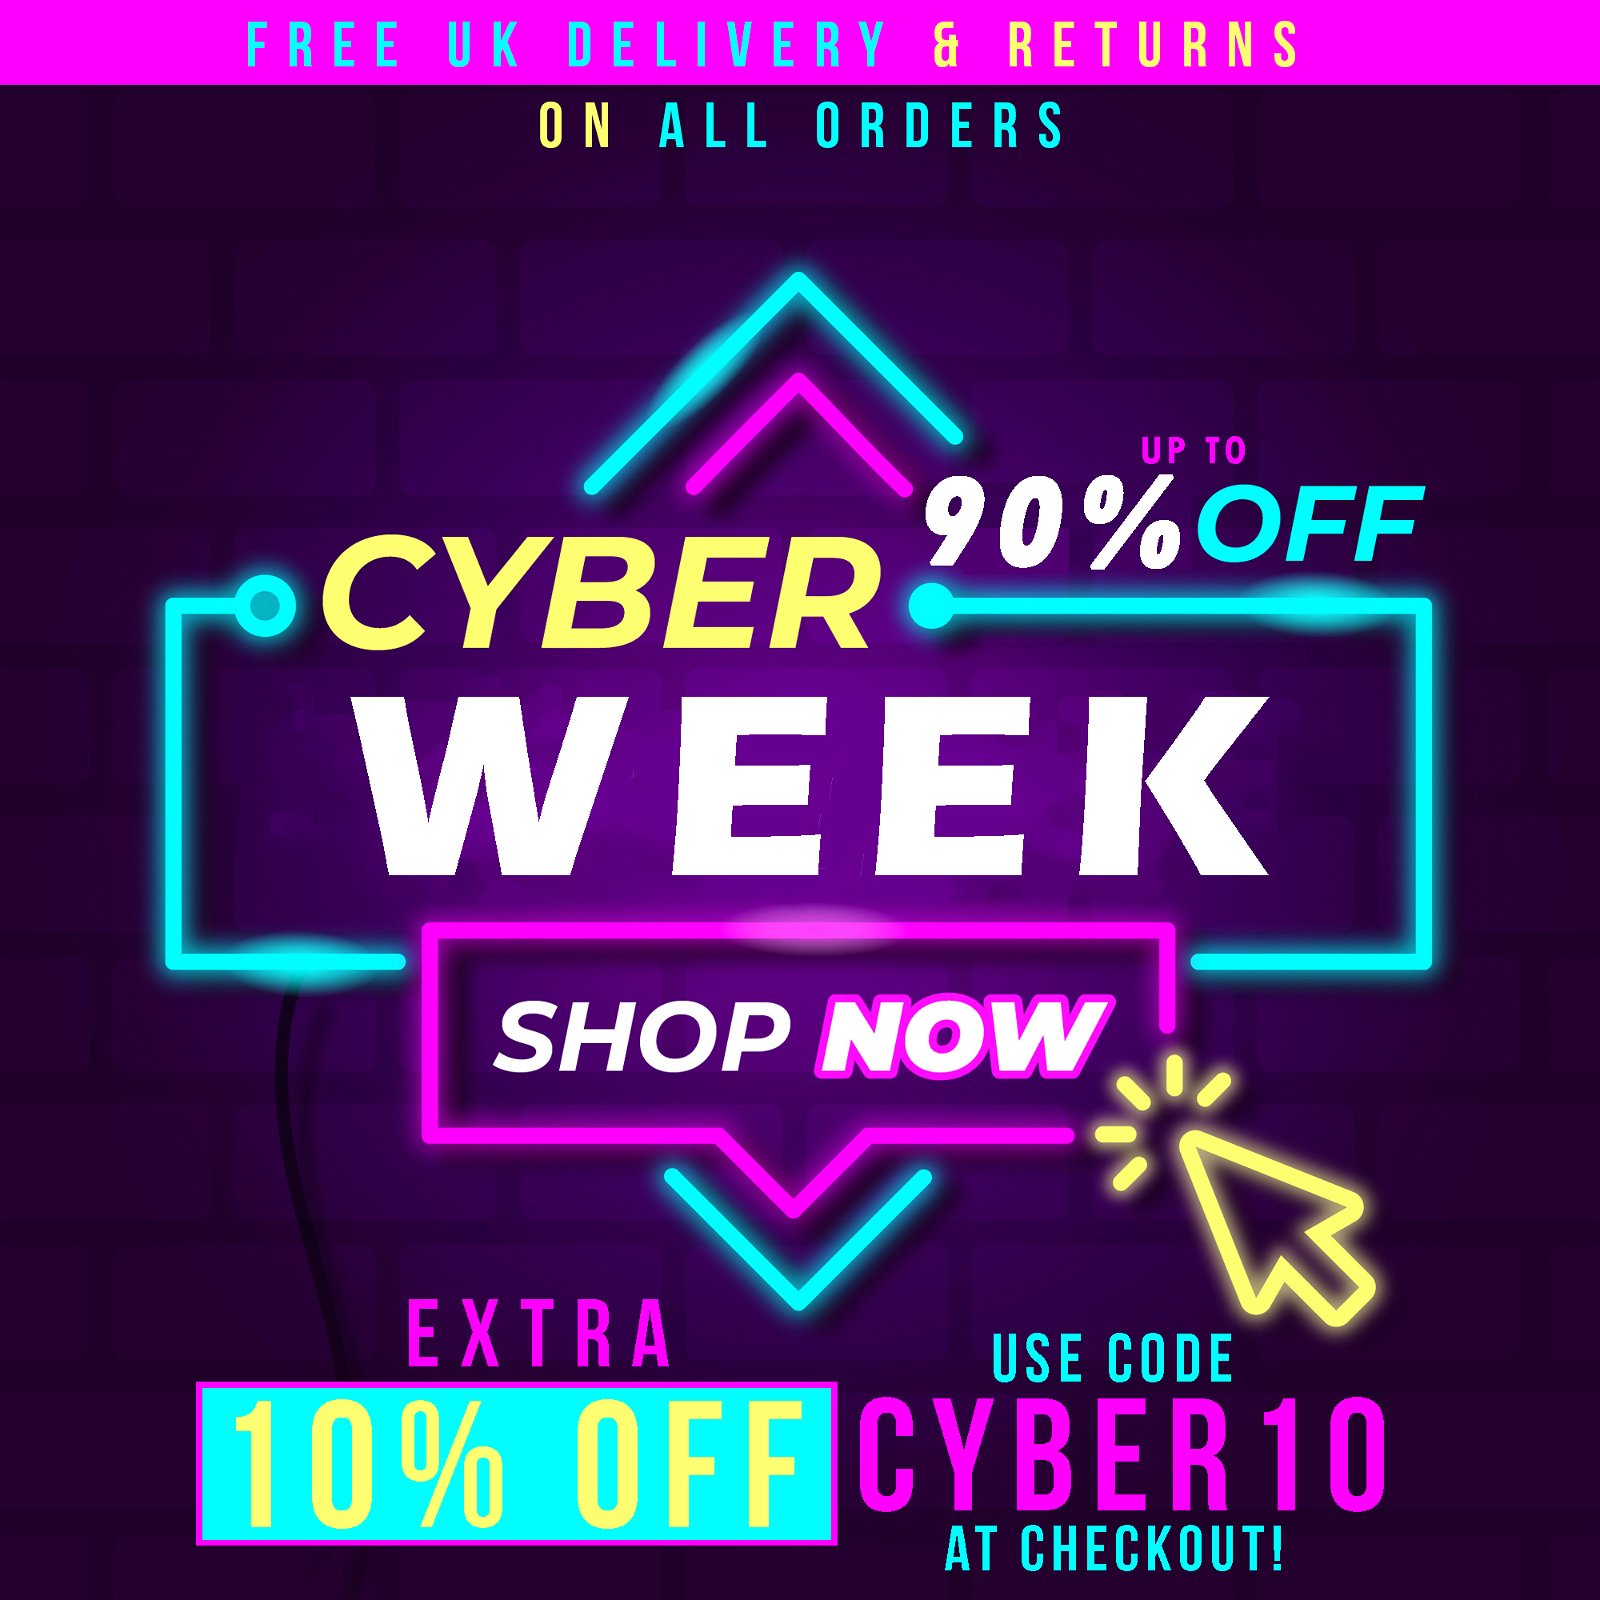 Www Jbwatches Com Cyber Week Sale Last Chance Up To 90 Off Top Brands Milled